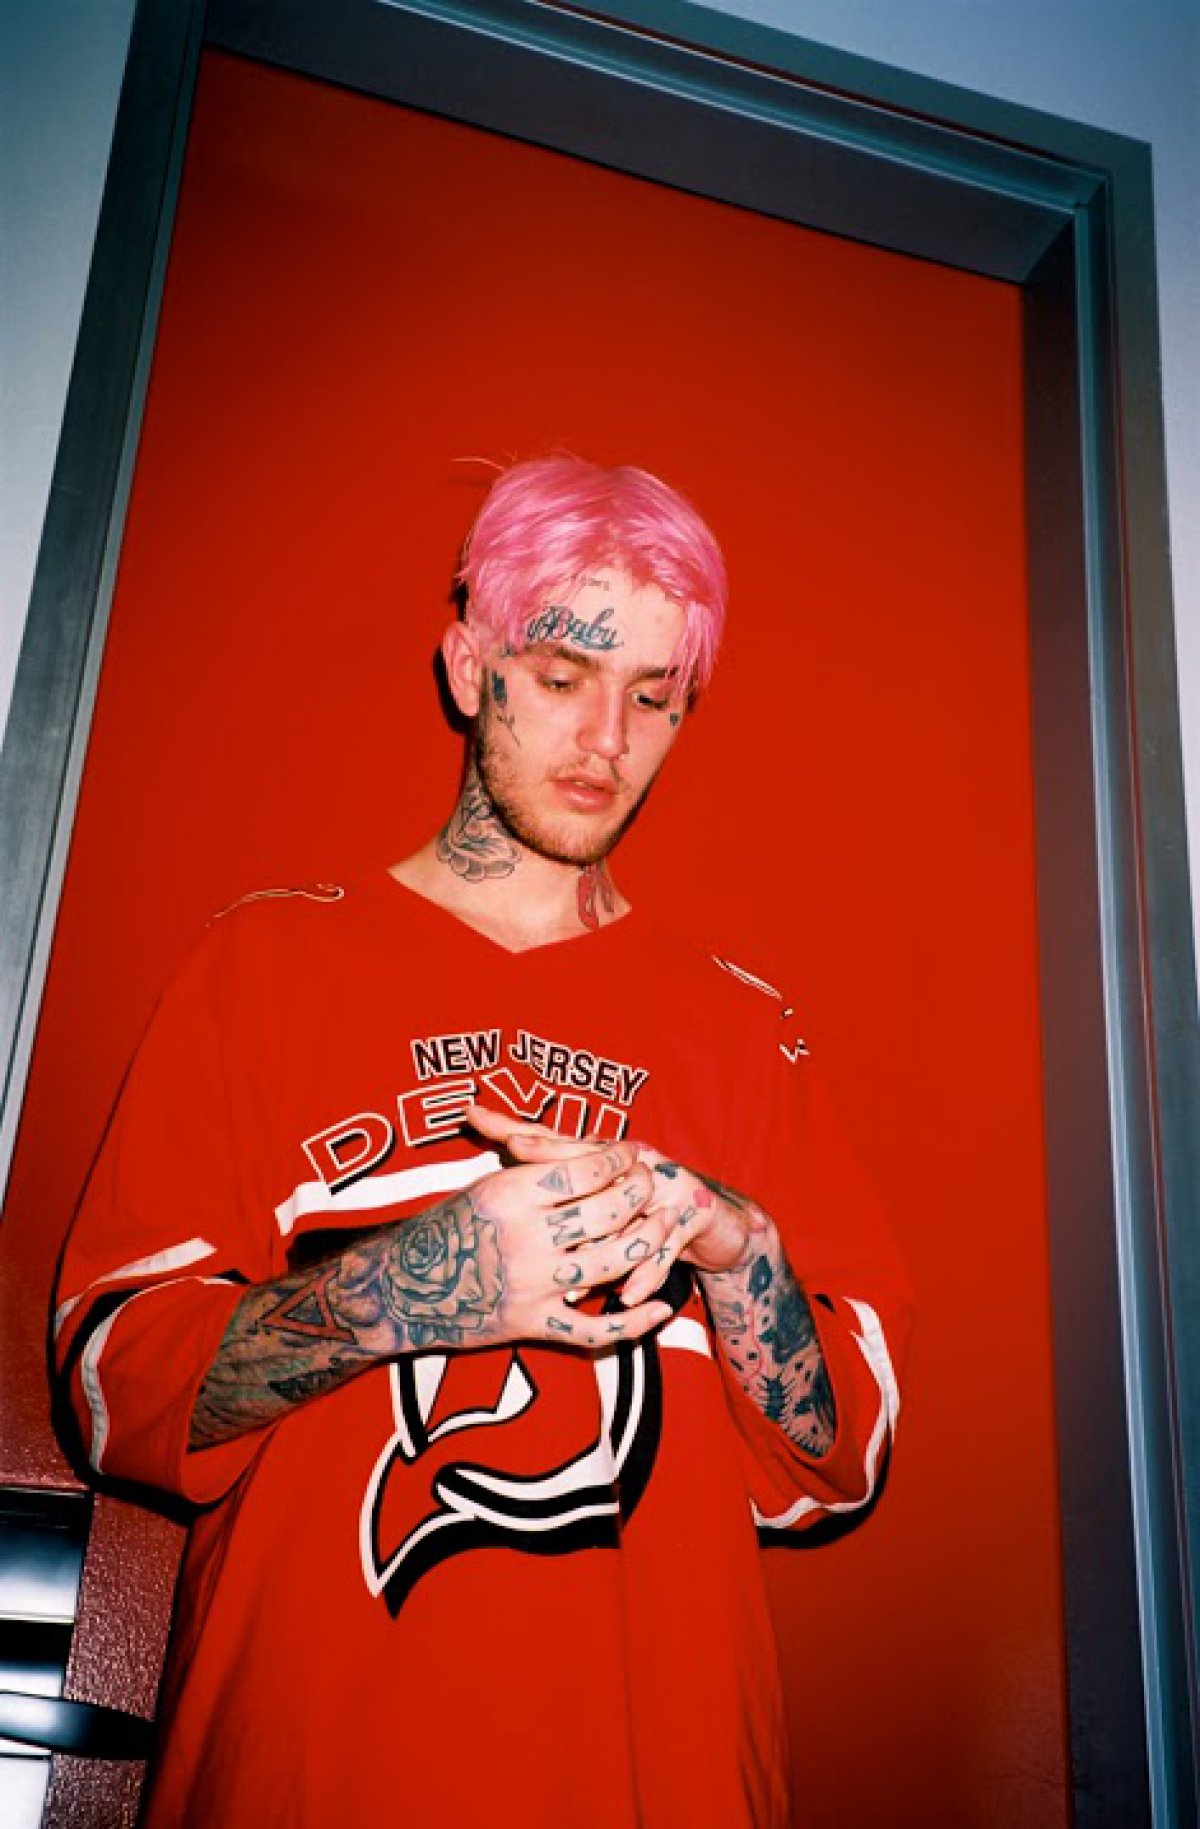 Lil Peep, rapper and singer, dead at 21 - Reality TV World1200 x 1829